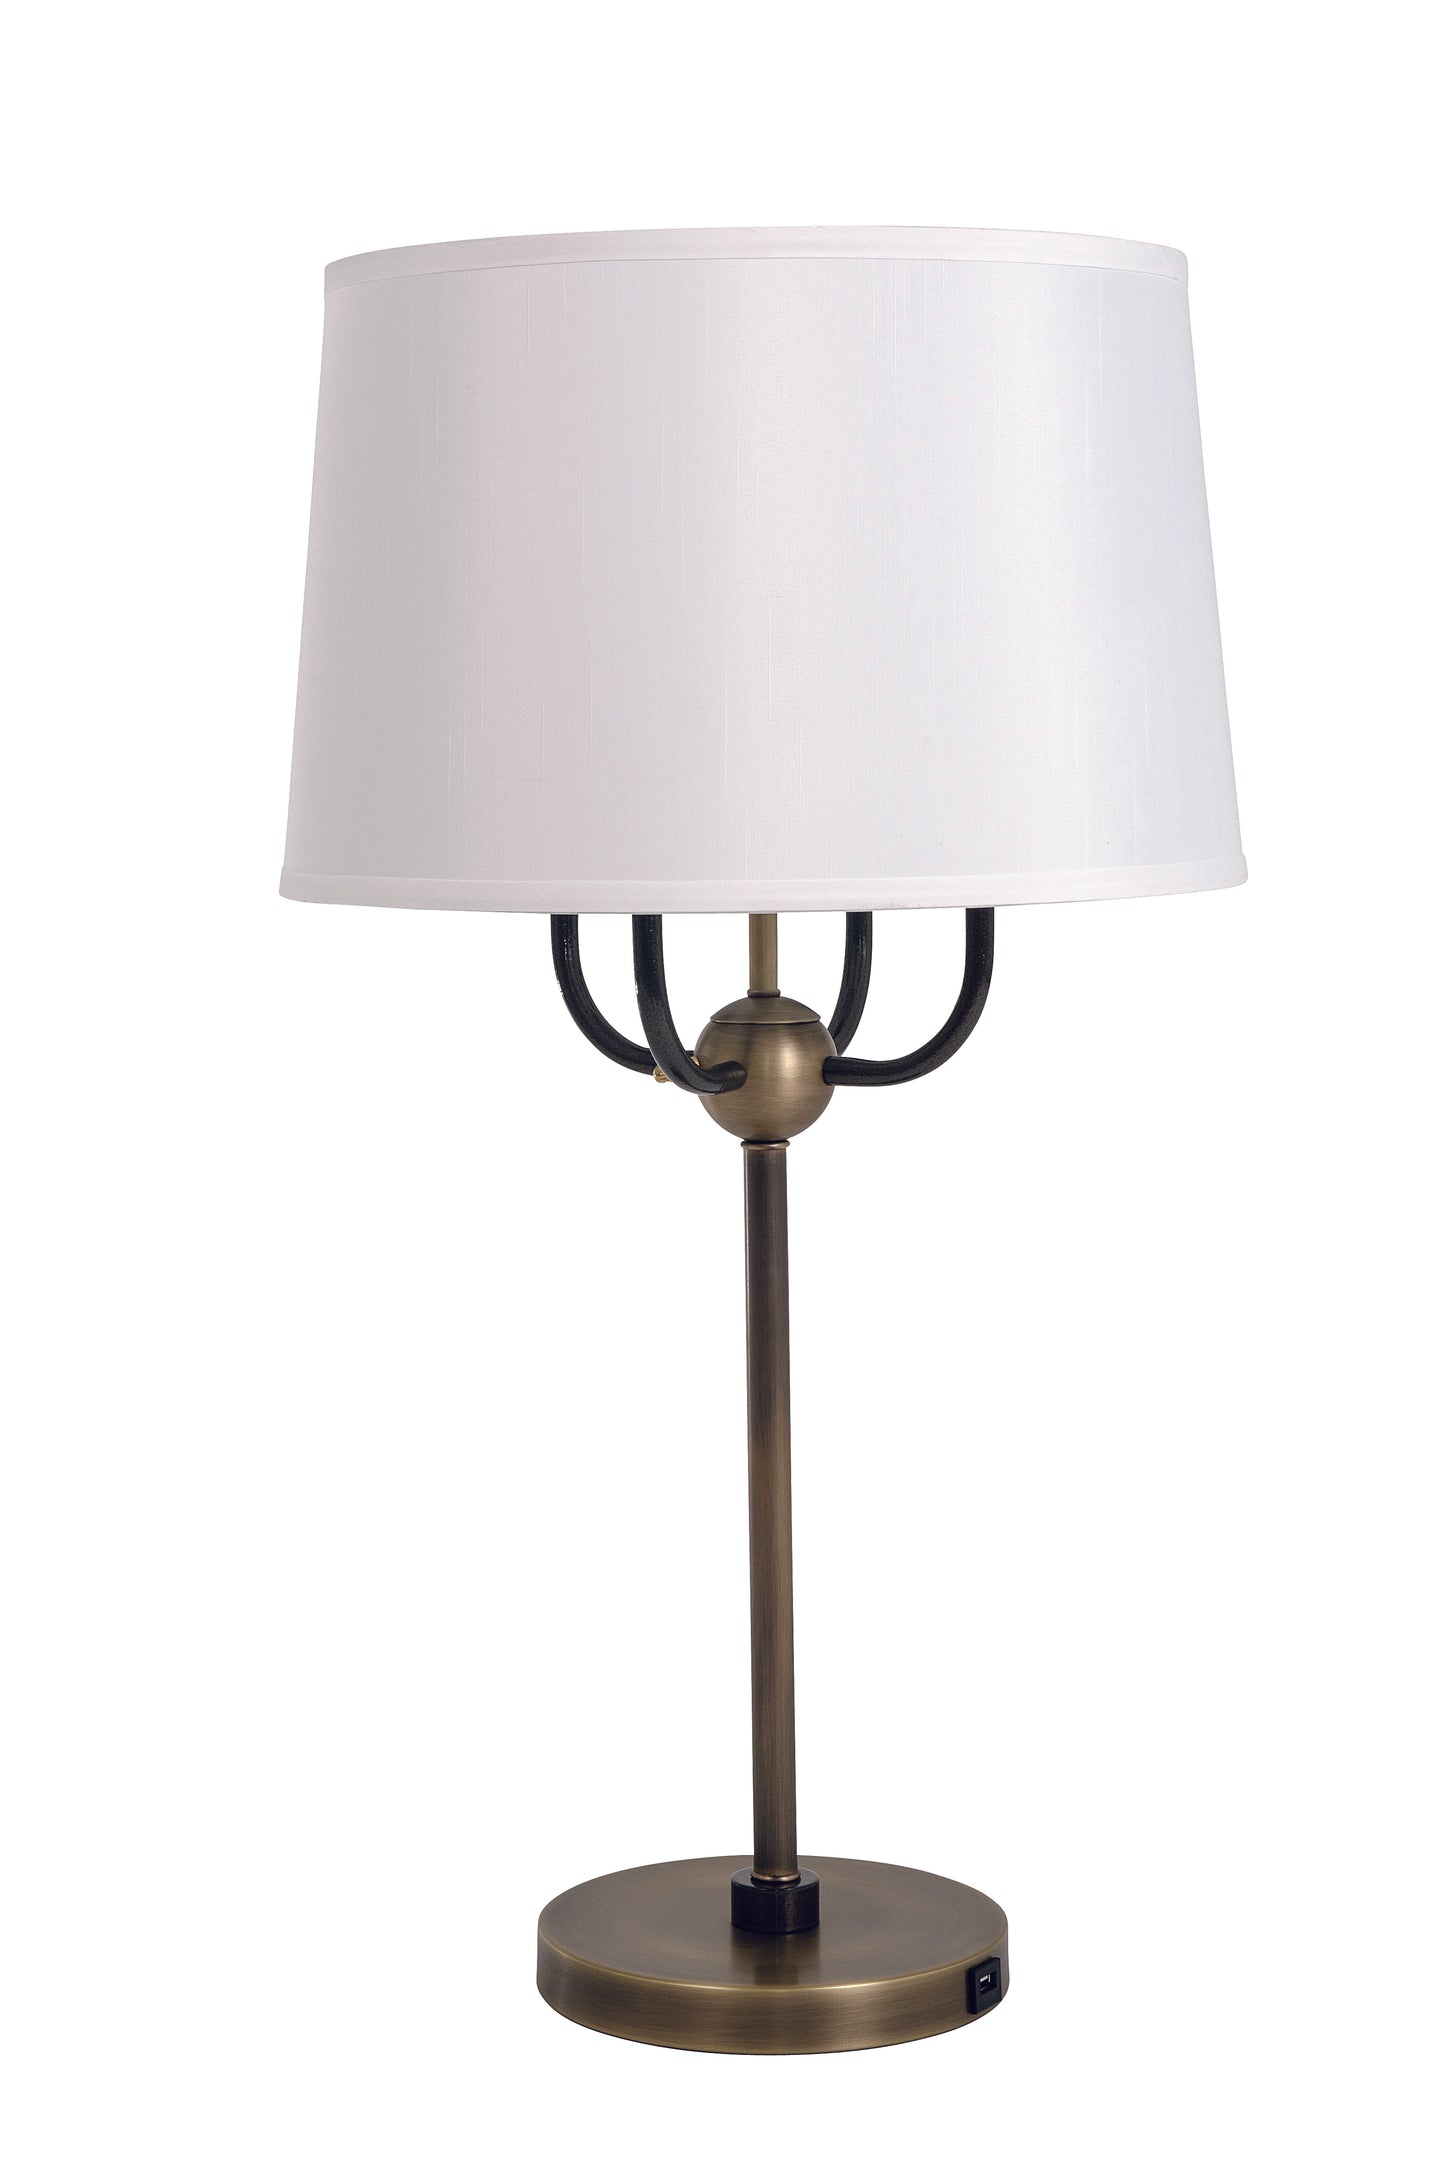 House of Troy Alpine 4 light cluster antique brass/hammered bronze accent table lamp A751-AB/HB